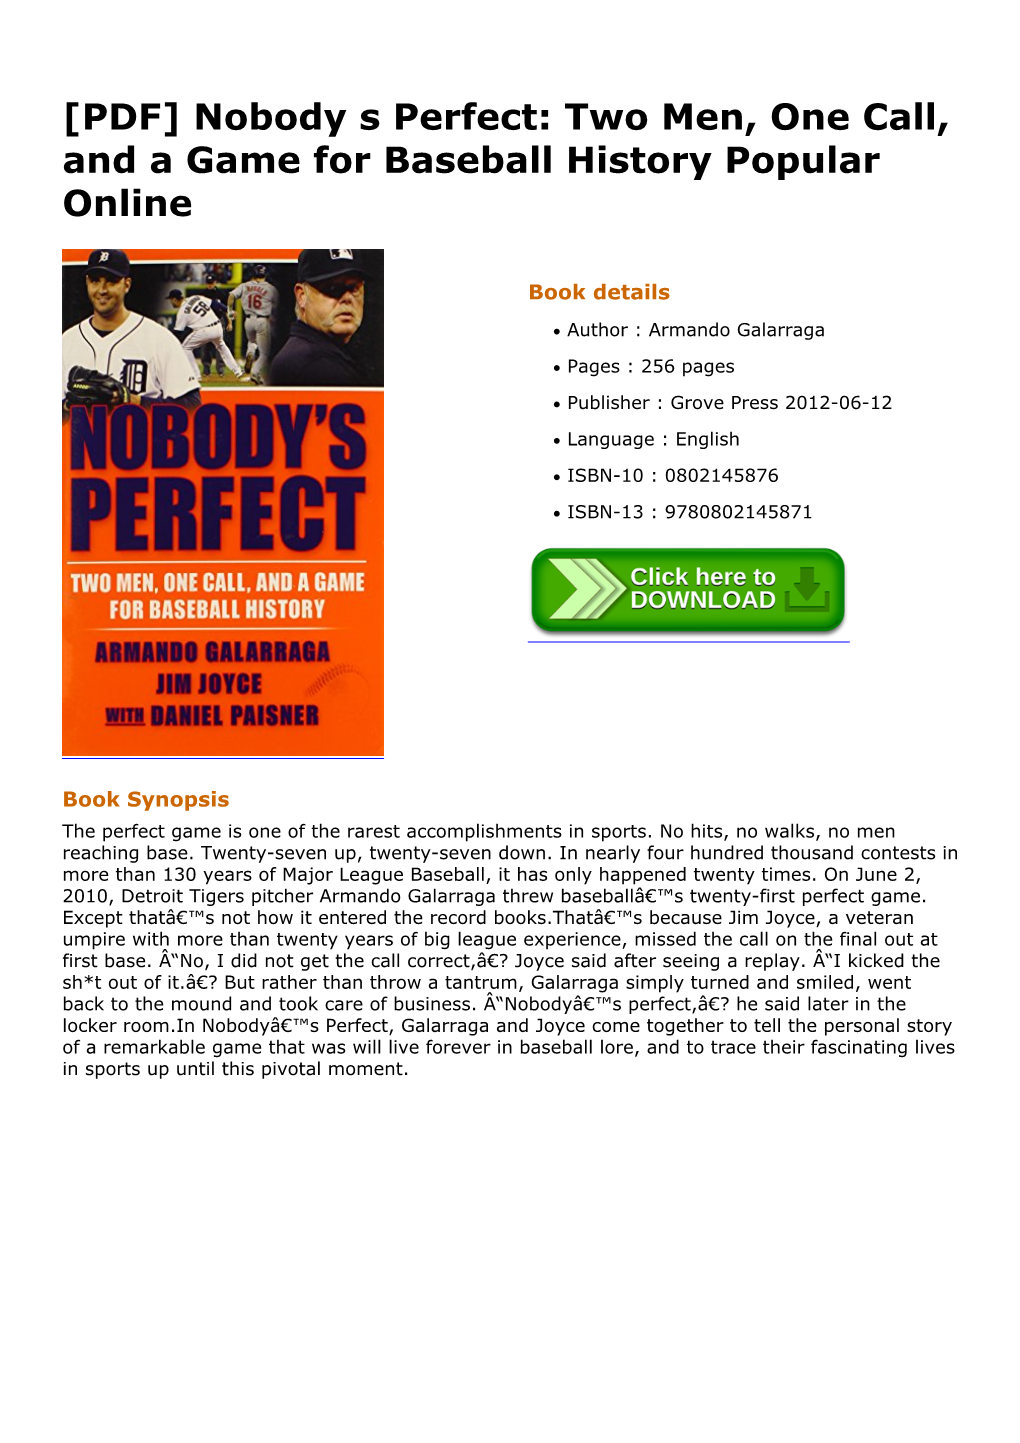 [PDF] Nobody S Perfect: Two Men, One Call, and a Game for Baseball History Popular Online